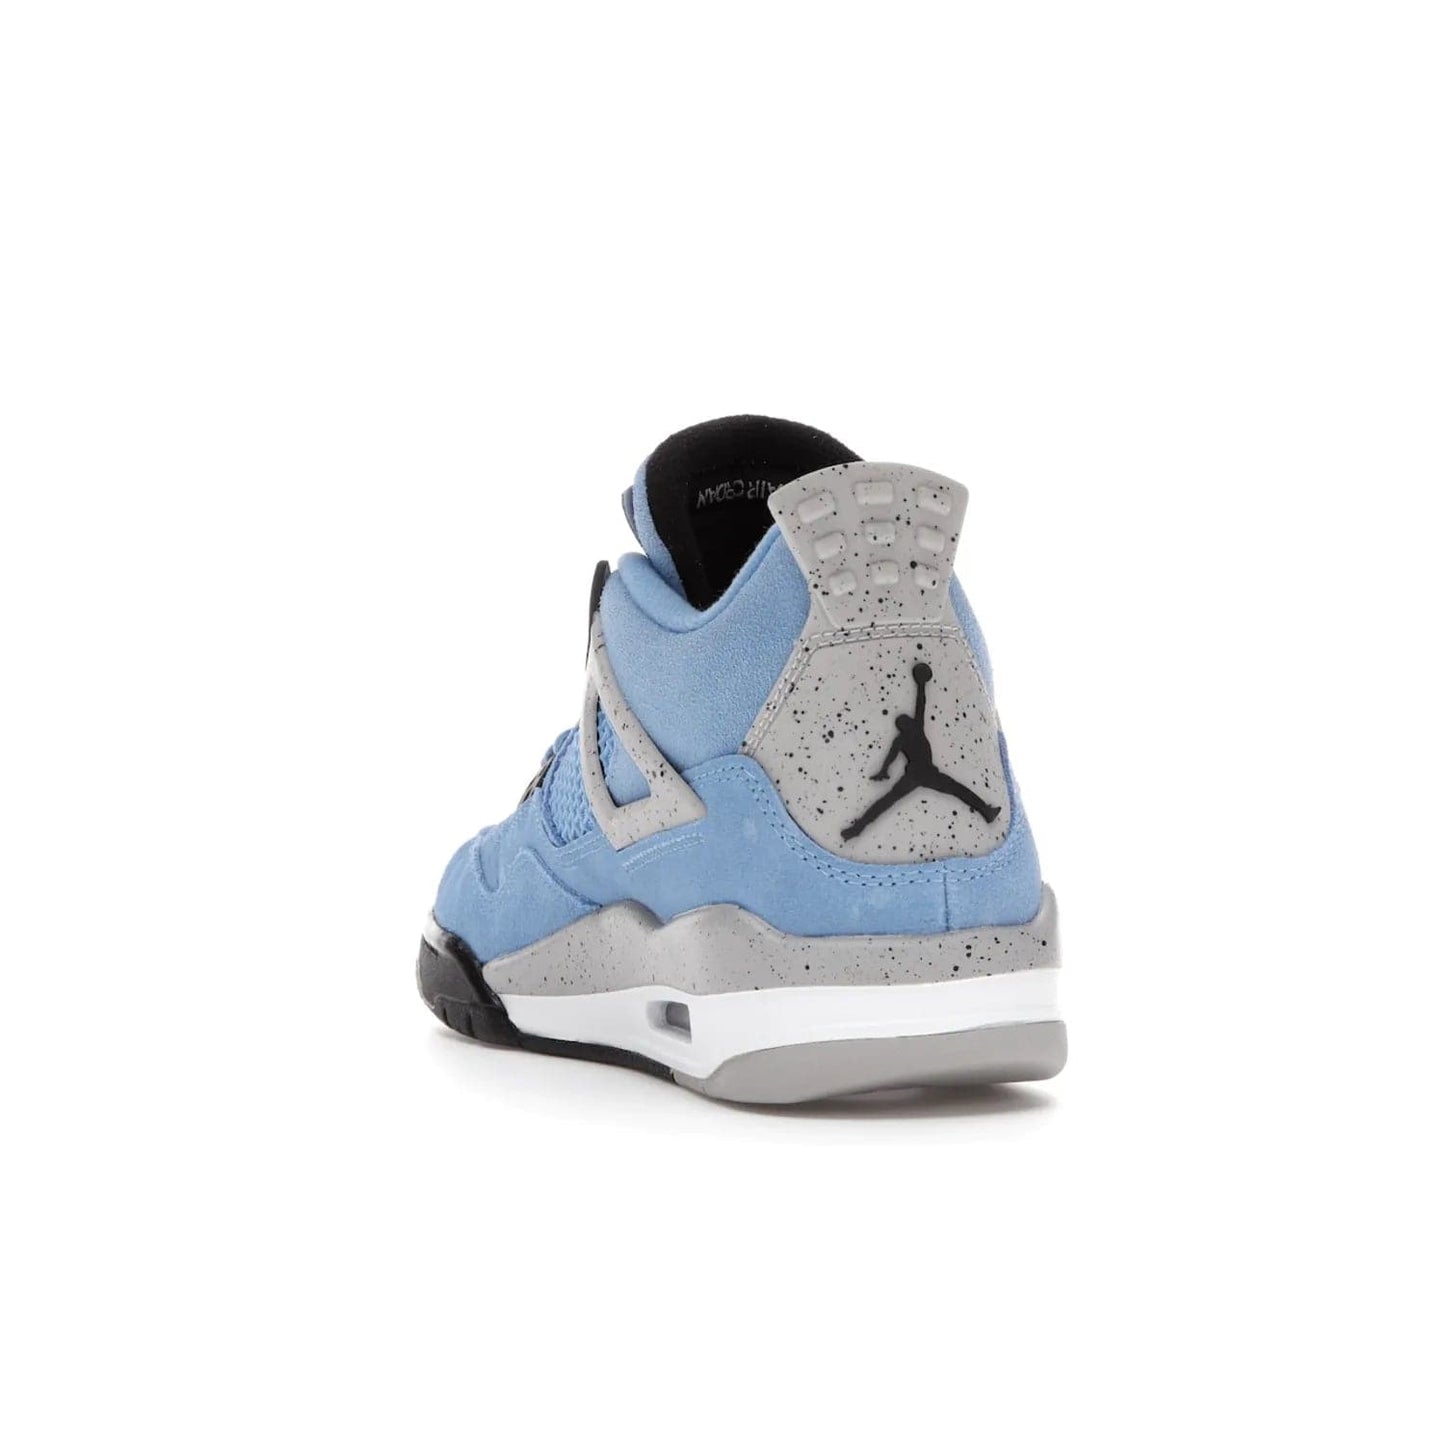 Jordan 4 Retro University Blue (GS) - Image 26 - Only at www.BallersClubKickz.com - Air Jordan 4 Retro University Blue GS: Classic silhouette and vibrant colors. Featuring a suede upper and Jumpman icon, this grade school-size shoe is perfect for collections and retails at $150.